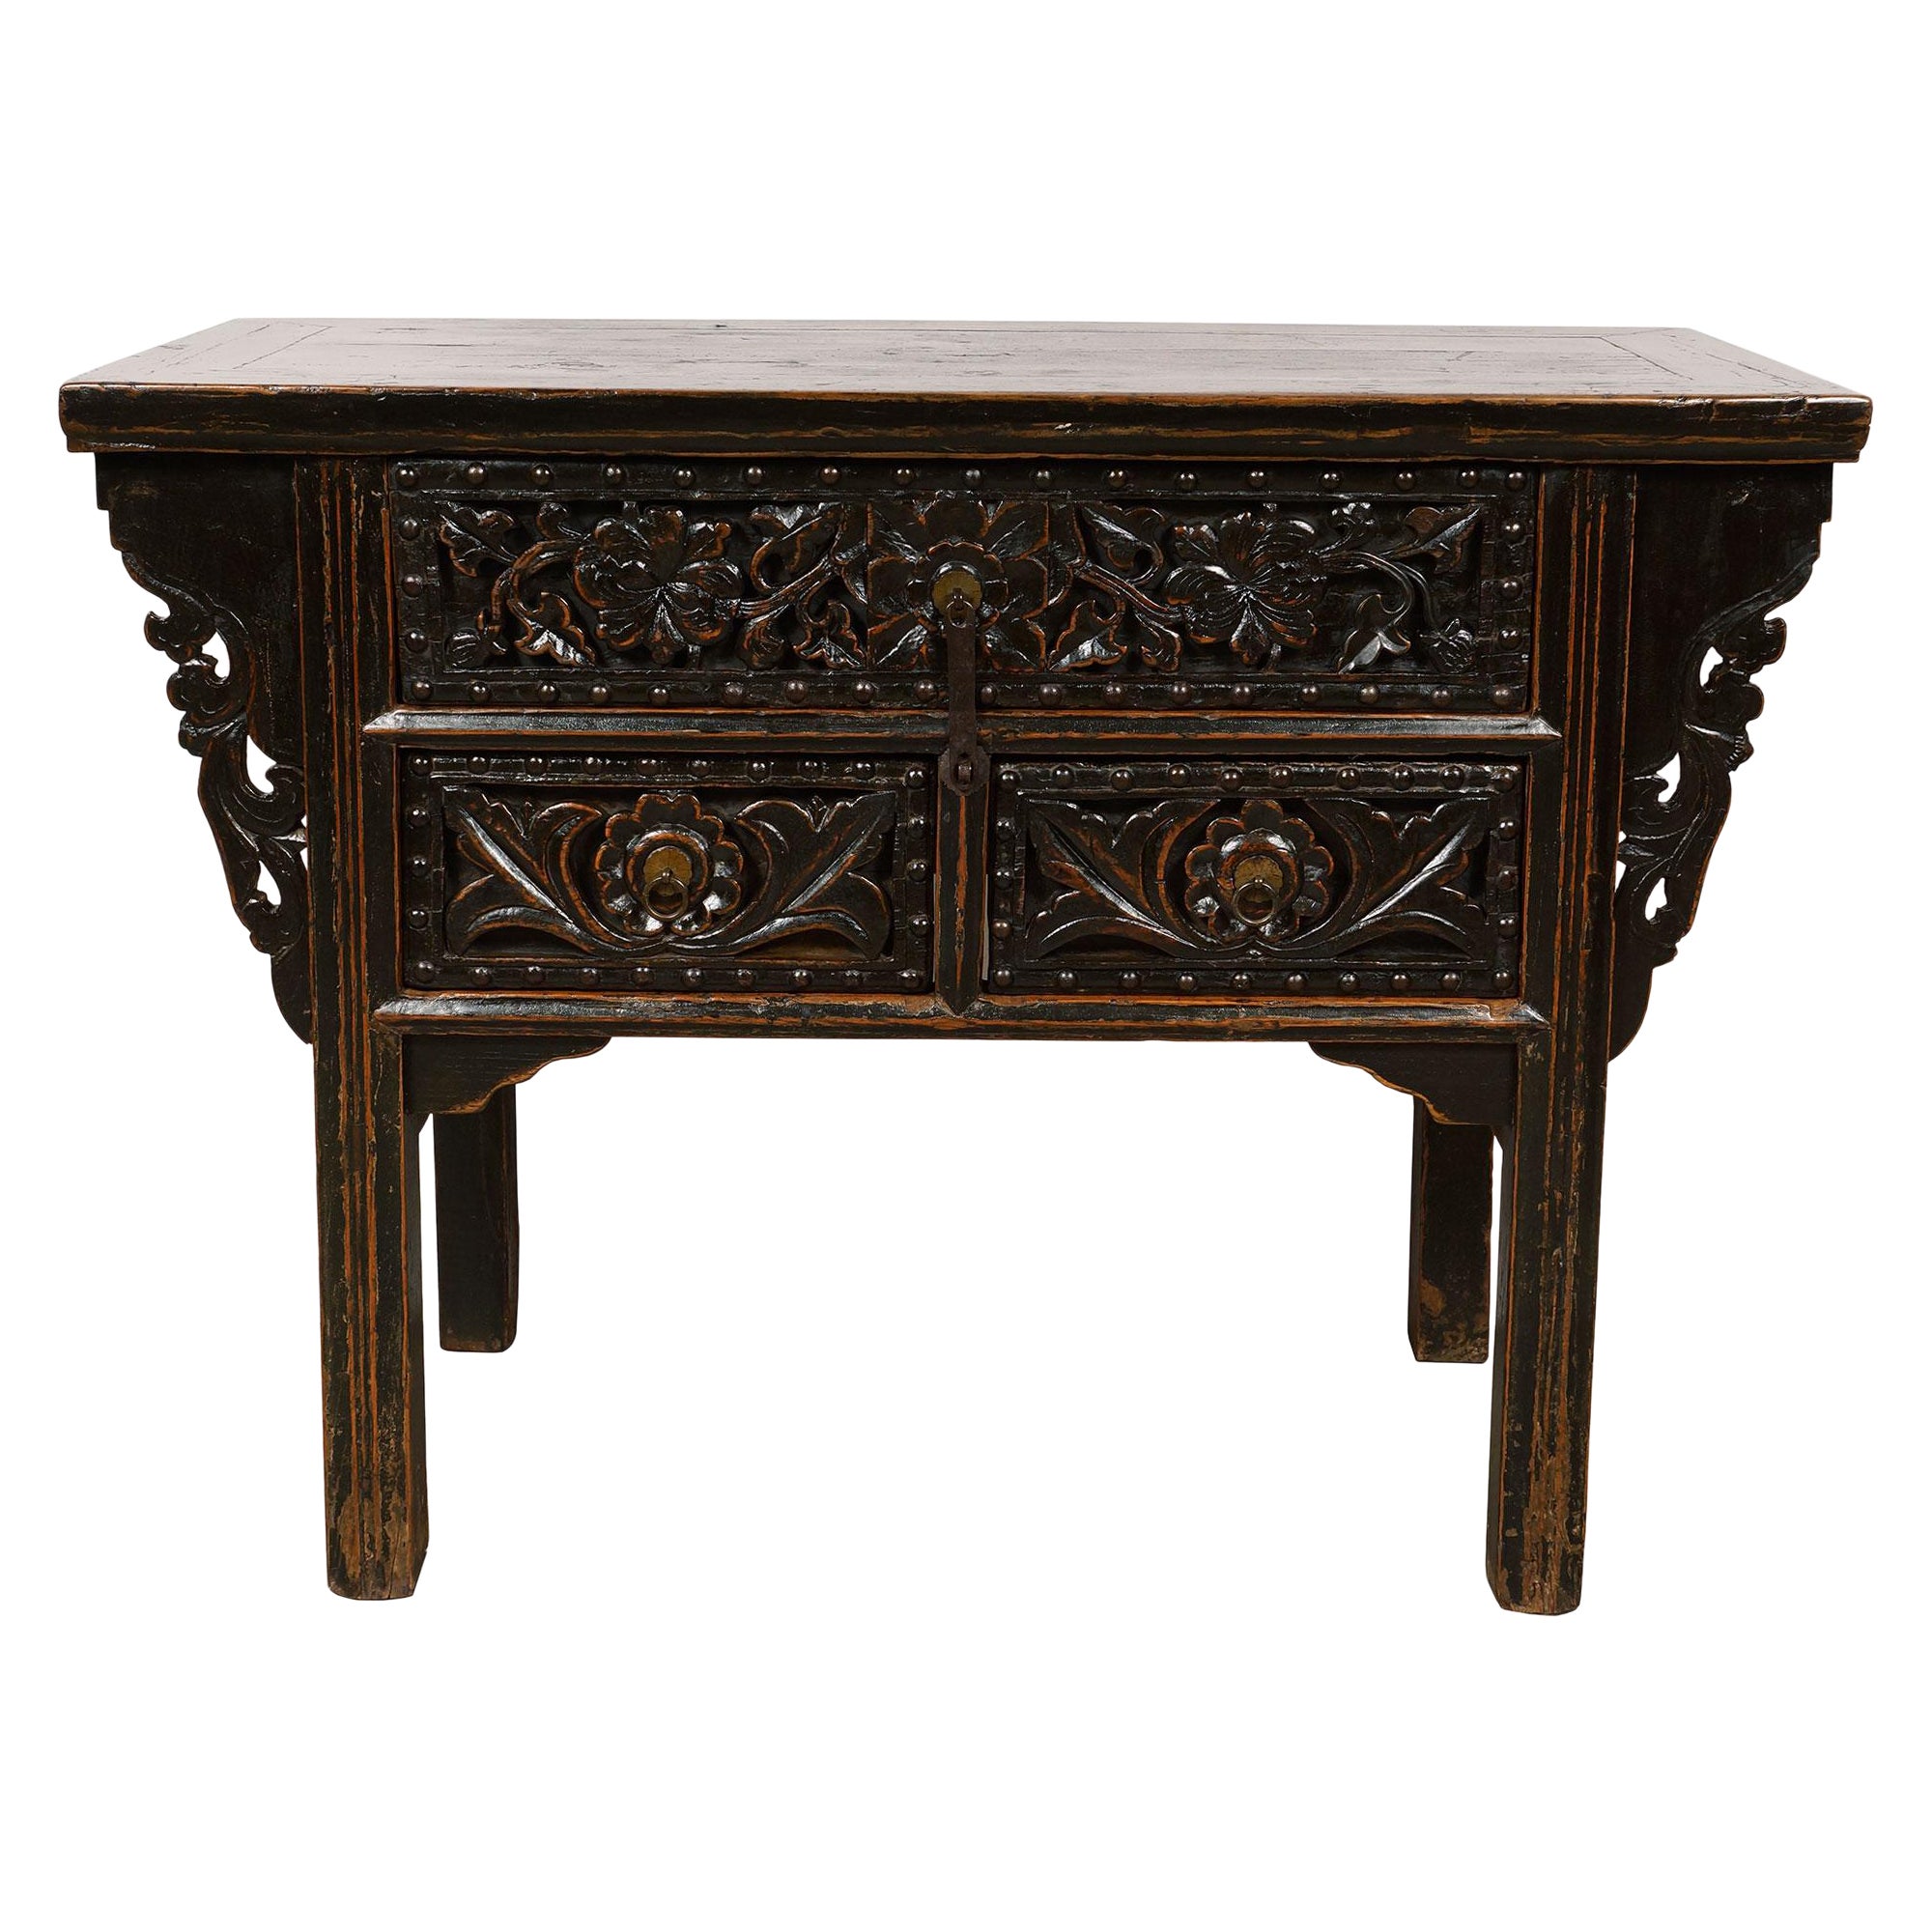 19th Century Antique Chinese Carved Shan xi Console Table/Sideboard For Sale